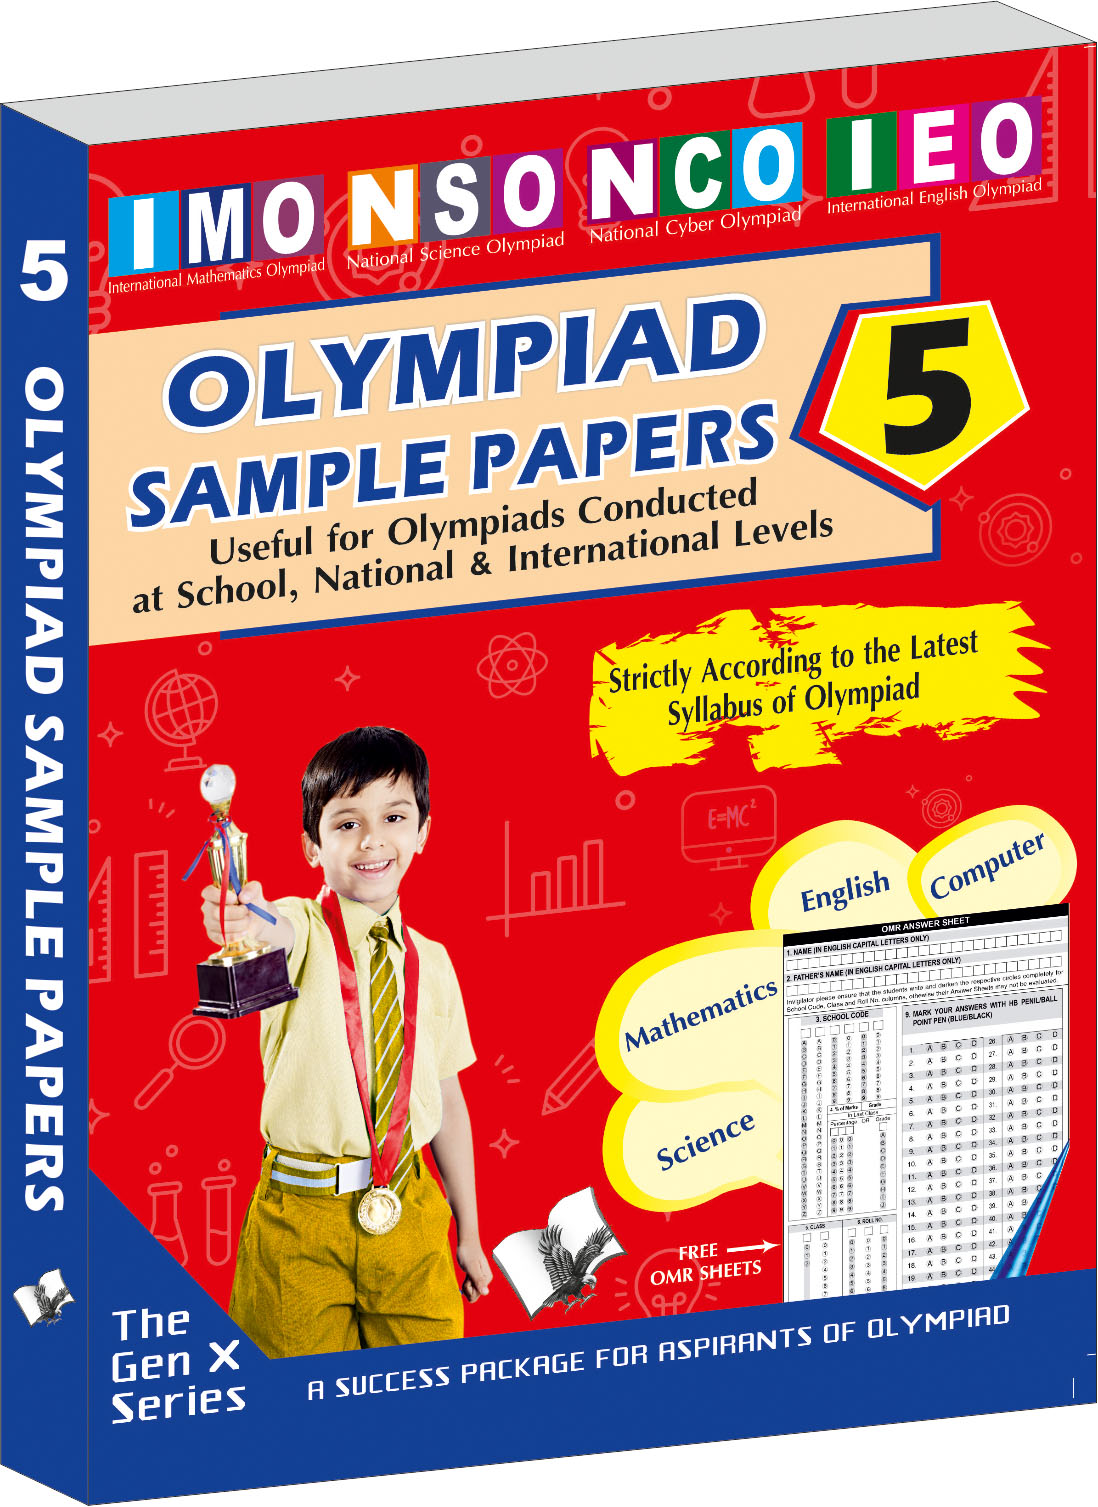 Olympiad Sample Paper 5-Useful for Olympiad conducted at School, National & International levels